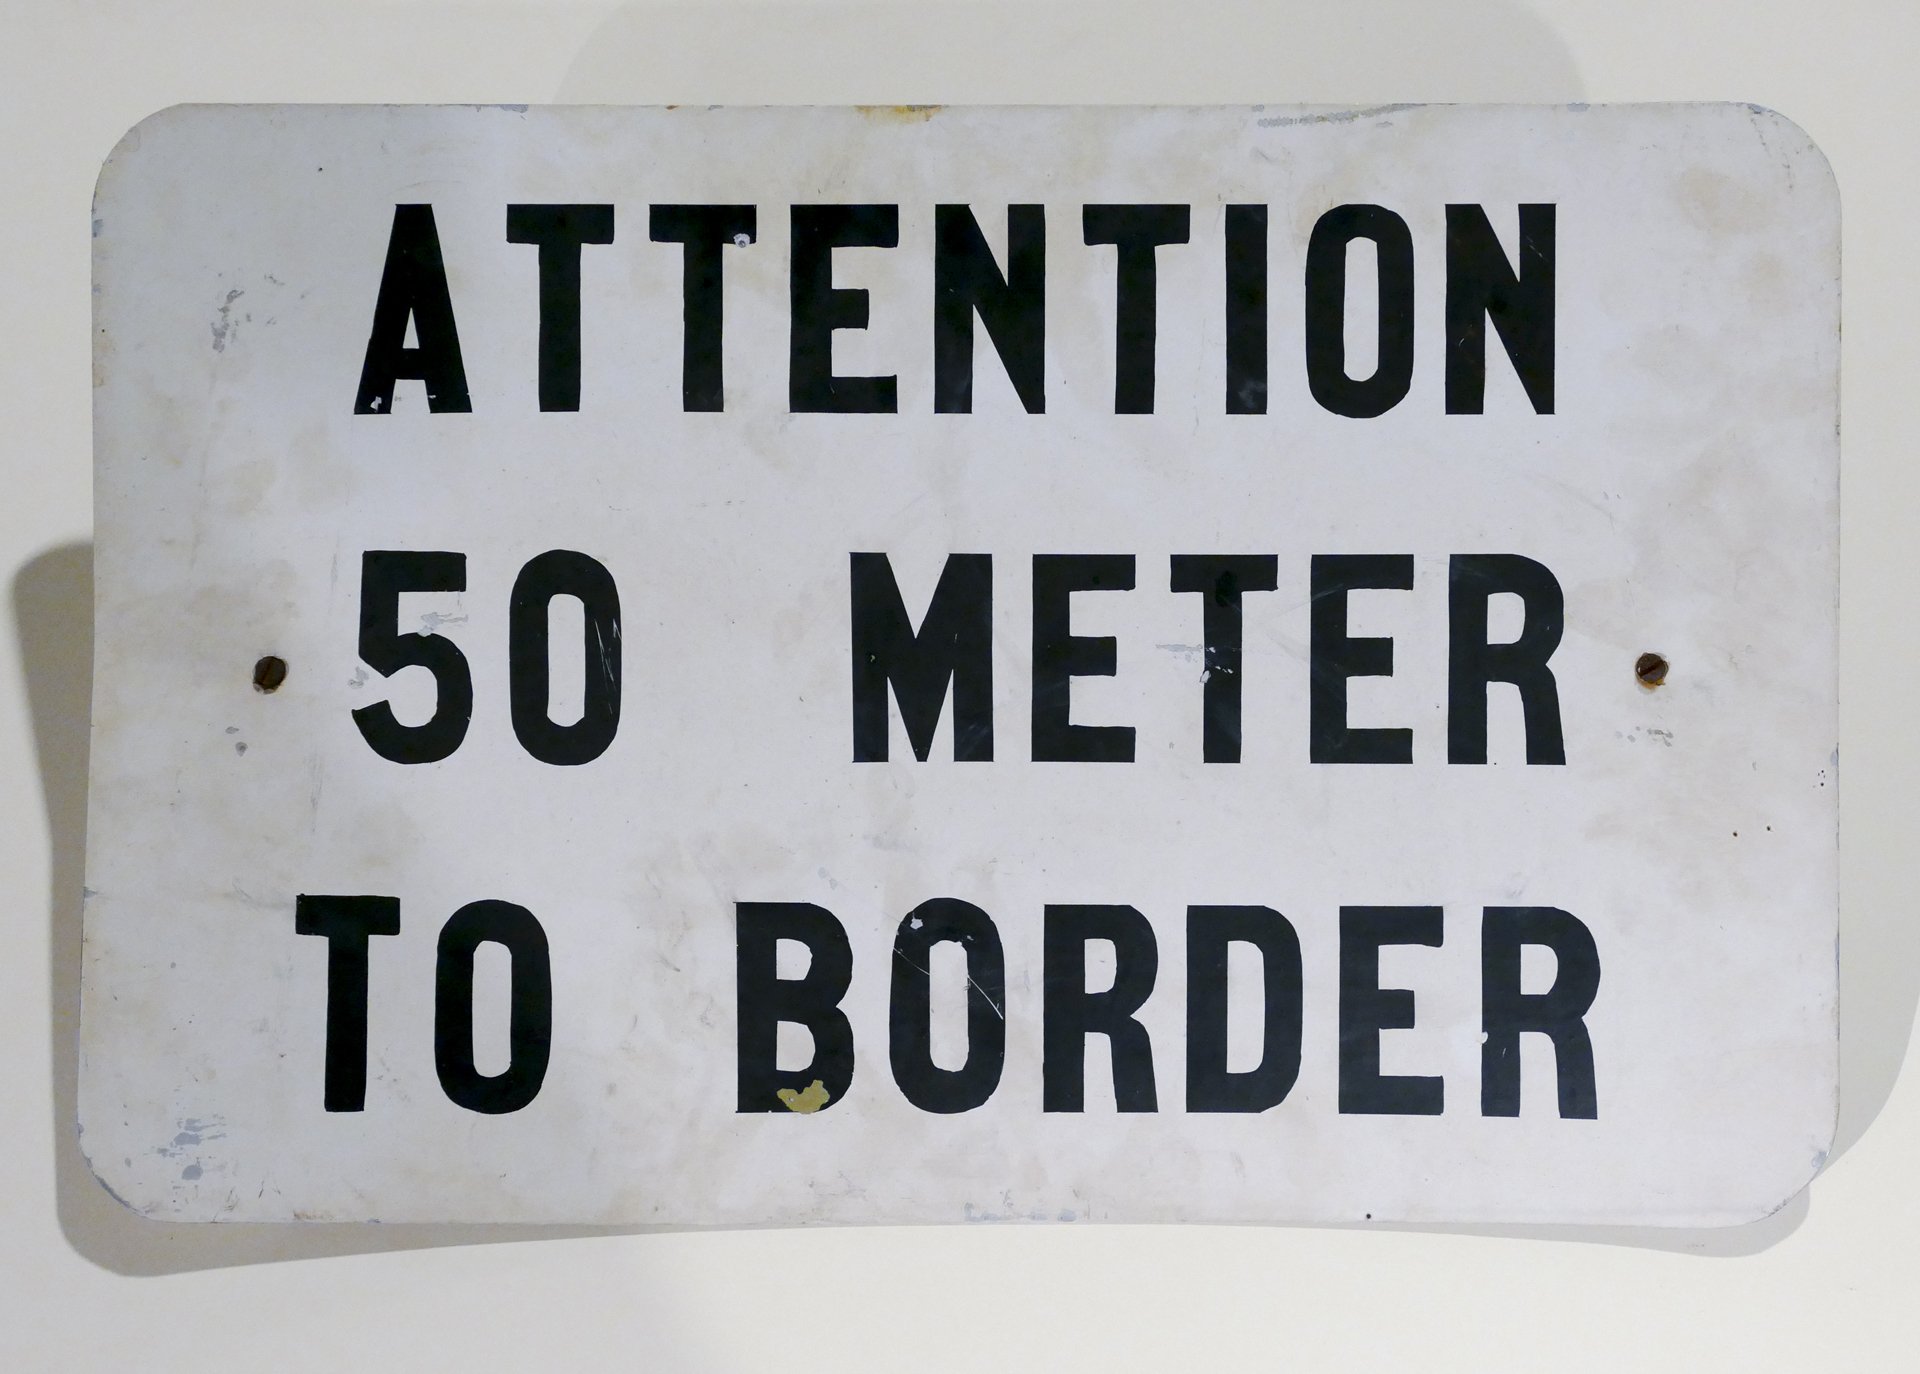 Schild "ATTENTION 50 METER TO BORDER" (Stadtmuseum Kassel CC BY-NC-SA)